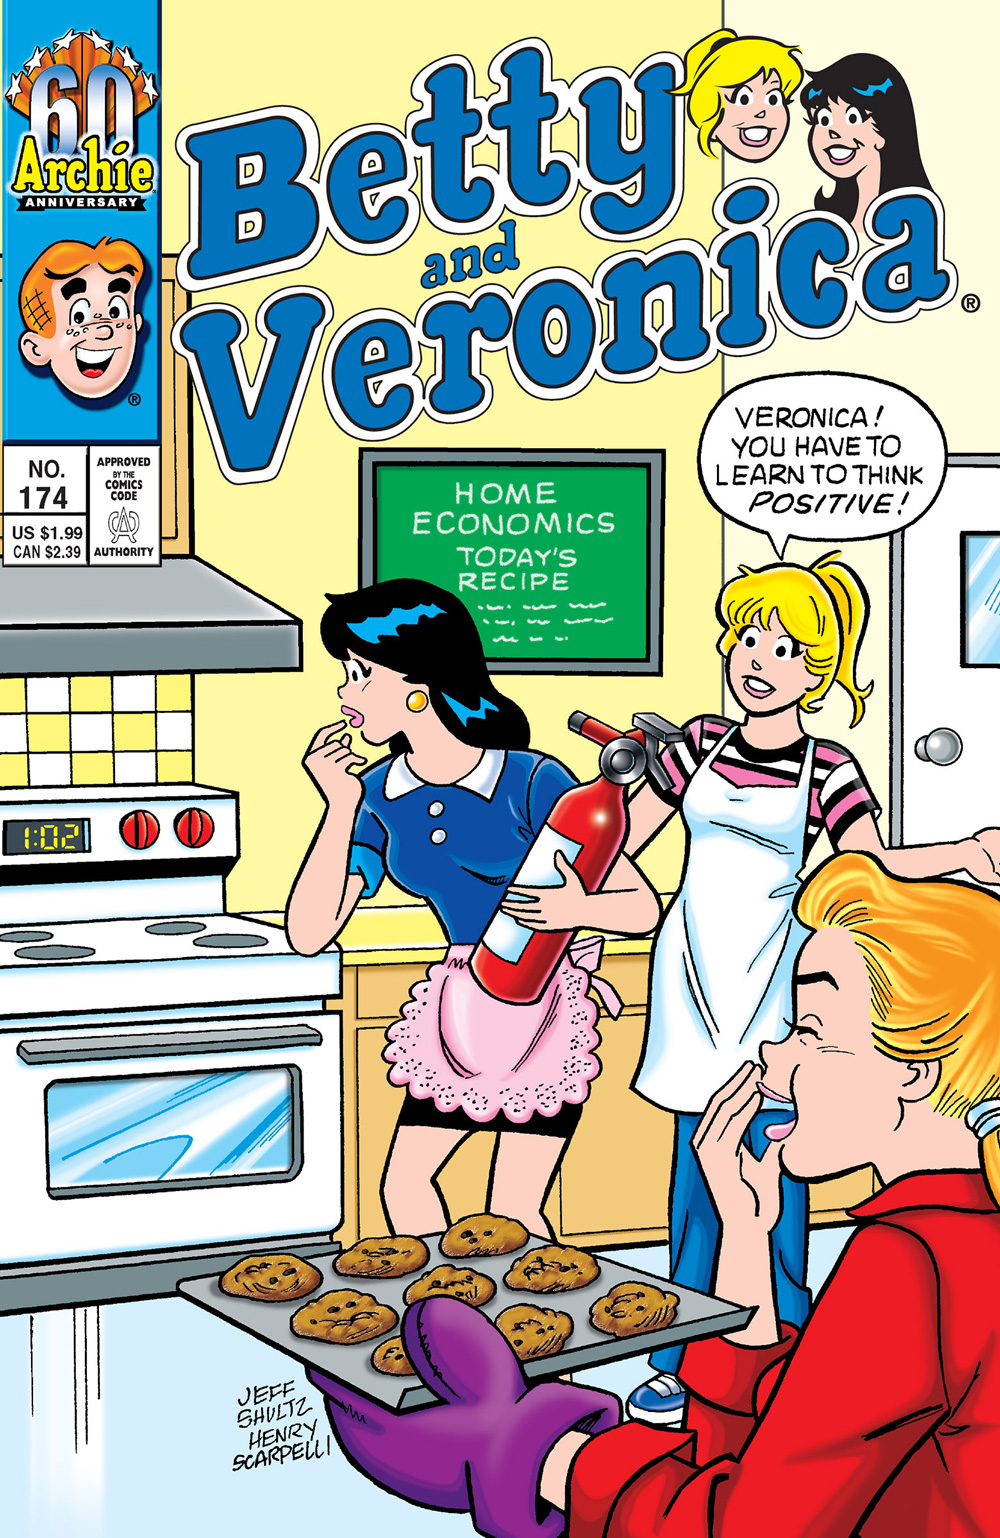 Betty and Veronica are in a home economics class, waiting for Veronica's cookies to come out of the oven. Veronica looks worried and holds a fire extinguisher. Betty says she has to learn to think positive.